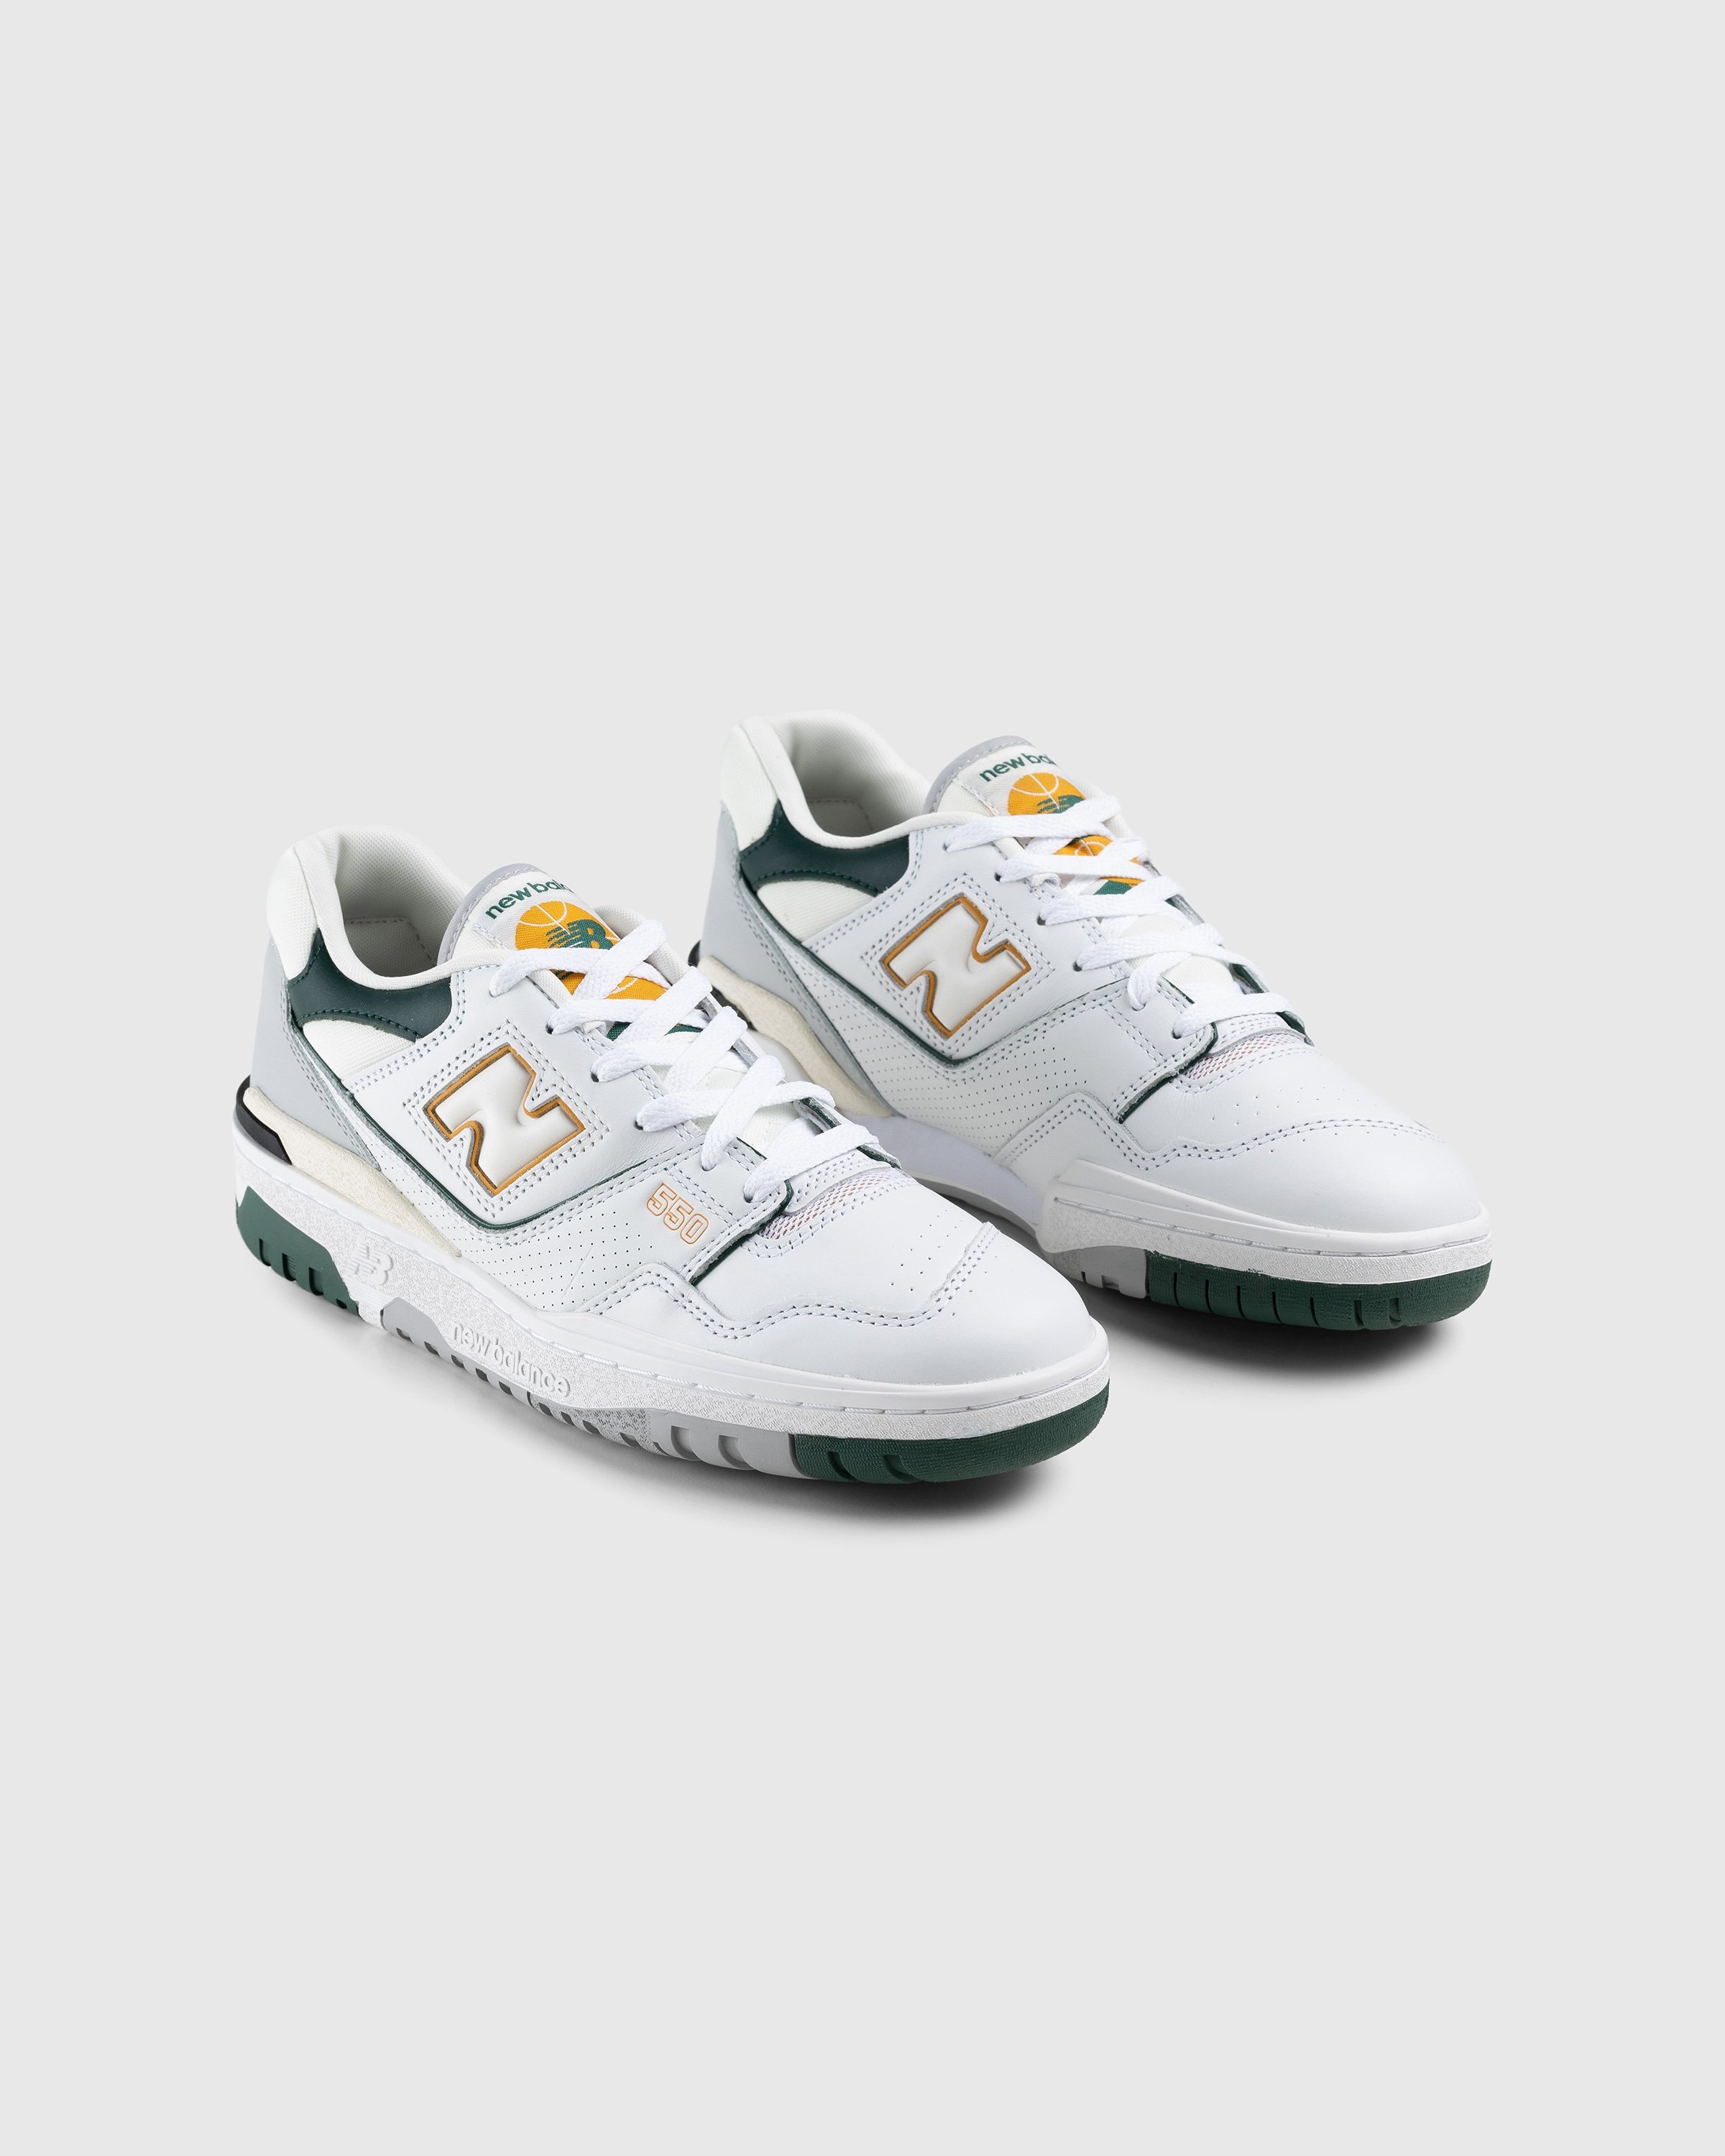 This GREY hits DIFFERENT! New Balance 550 White Grey Castlerock On